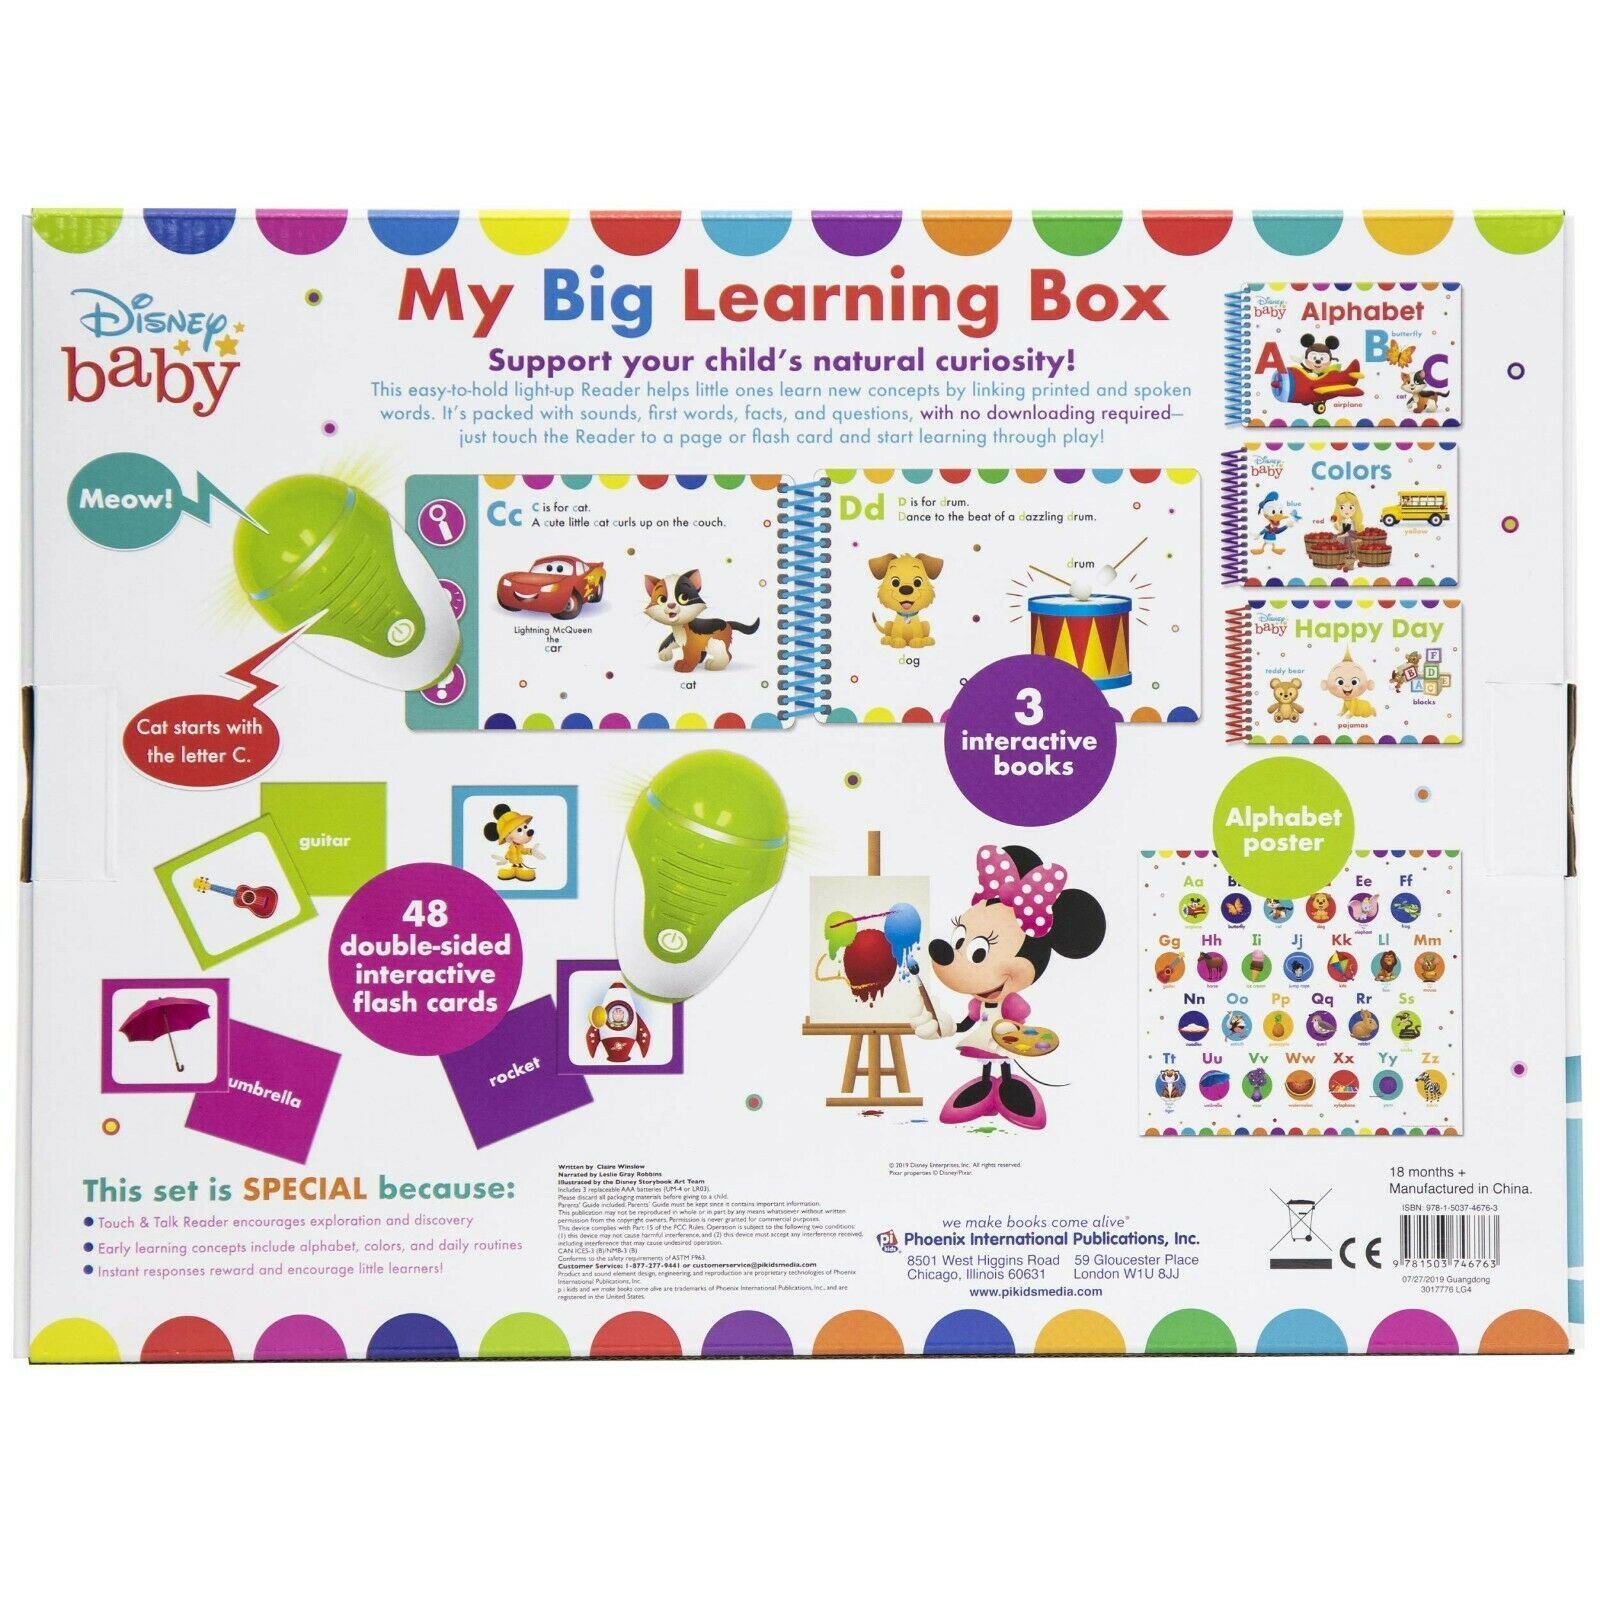 Disney Baby: My Big Learning Box Sound Book Set (Other) - image 2 of 4